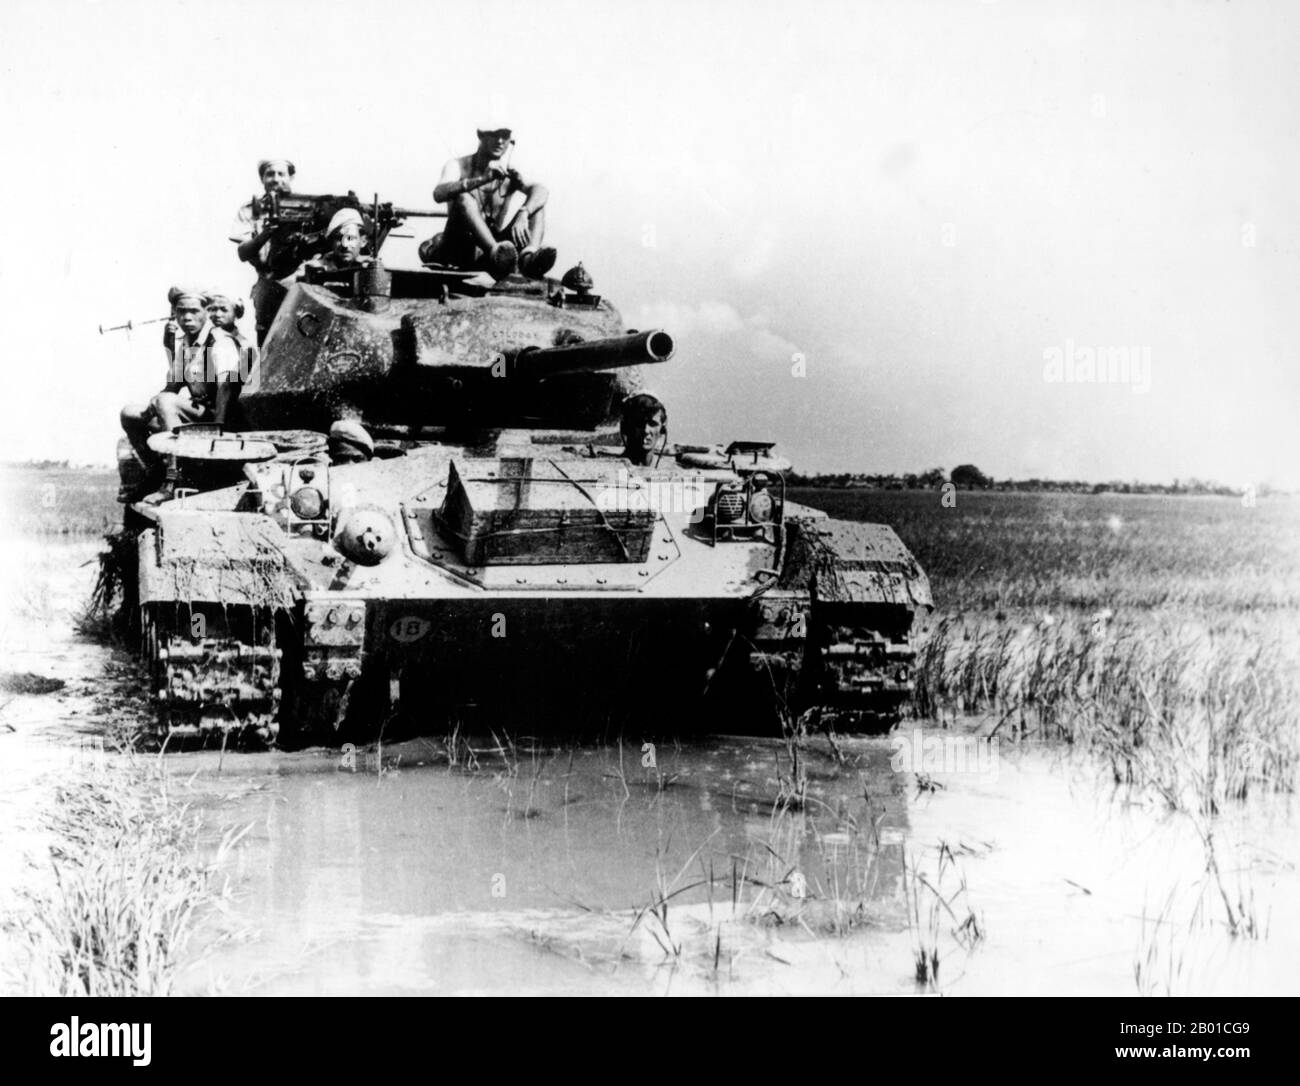 Vietnam: French troops aboard an American M24 (Chaffee) light tank, First Indochina War (1946-1954).  The First Indochina War (also known as the French Indochina War, Anti-French War, Franco-Vietnamese War, Franco-Vietminh War, Indochina War, Dirty War in France, and Anti-French Resistance War in contemporary Vietnam) was fought in French Indochina from December 19, 1946, until August 1, 1954, between the French Union's French Far East Expeditionary Corps, led by France and supported by Emperor Bảo Đại's Vietnamese National Army against the Việt Minh, led by Hồ Chí Minh and Võ Nguyên Giáp. Stock Photo